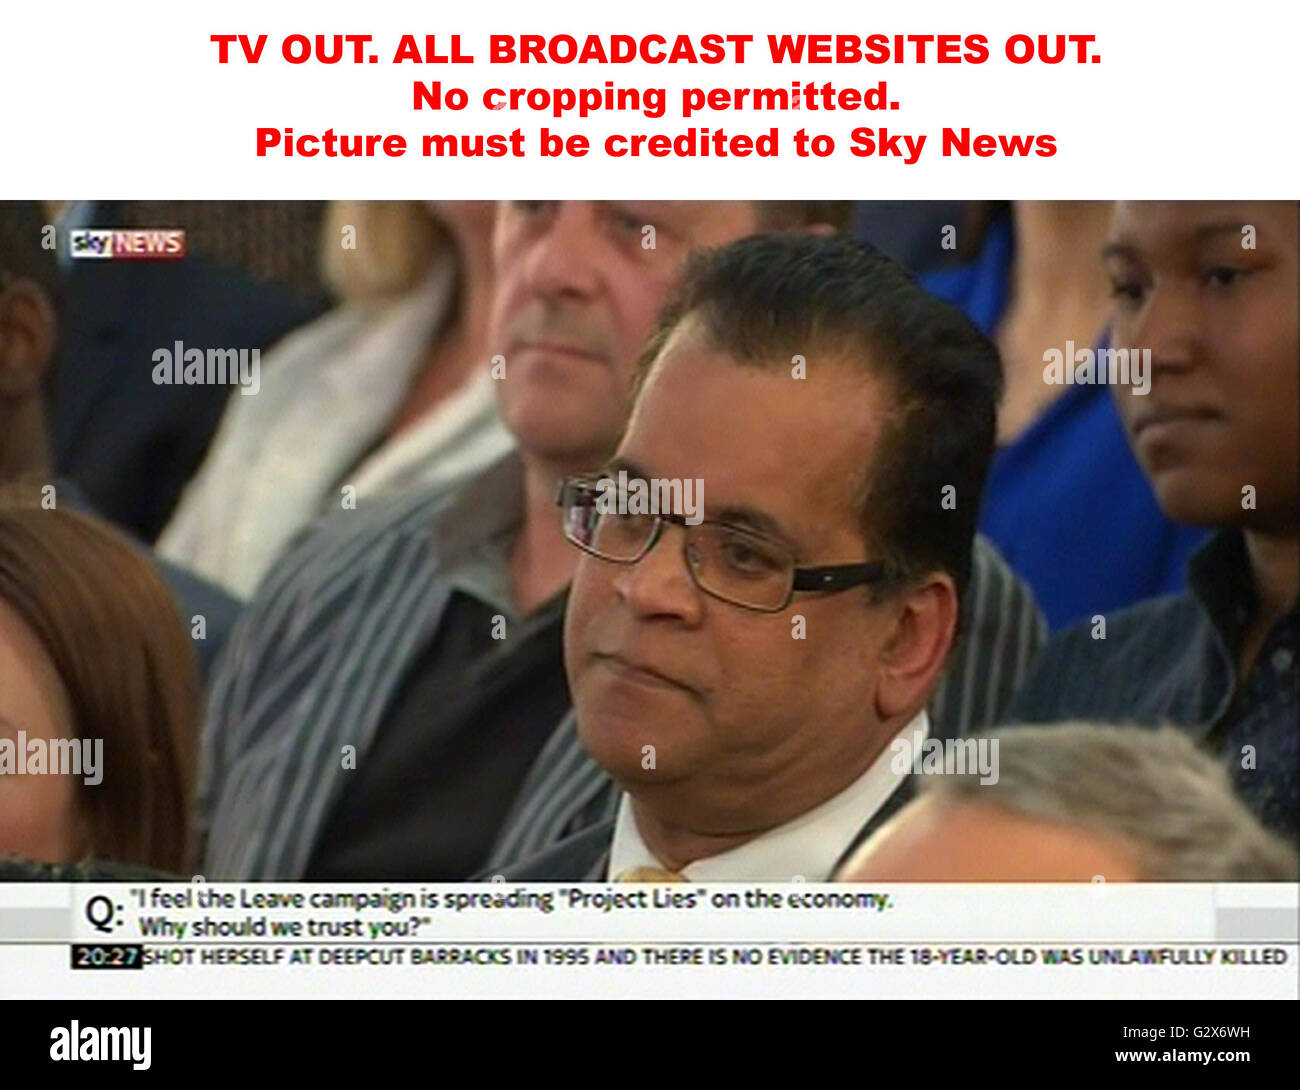 TV OUT. INTERNET OUT. No cropping permitted. Picture must be credited to Sky News. We are advised that videograbs should not be used more than 48 hours after the time of original transmission, without the consent of the copyright holder. Video grab taken from Sky News of John Shankar asking Justice Secretary Michael Gove a question during a Q&A on the EU referendum, at the Sky News studios in Osterley, west London. Stock Photo